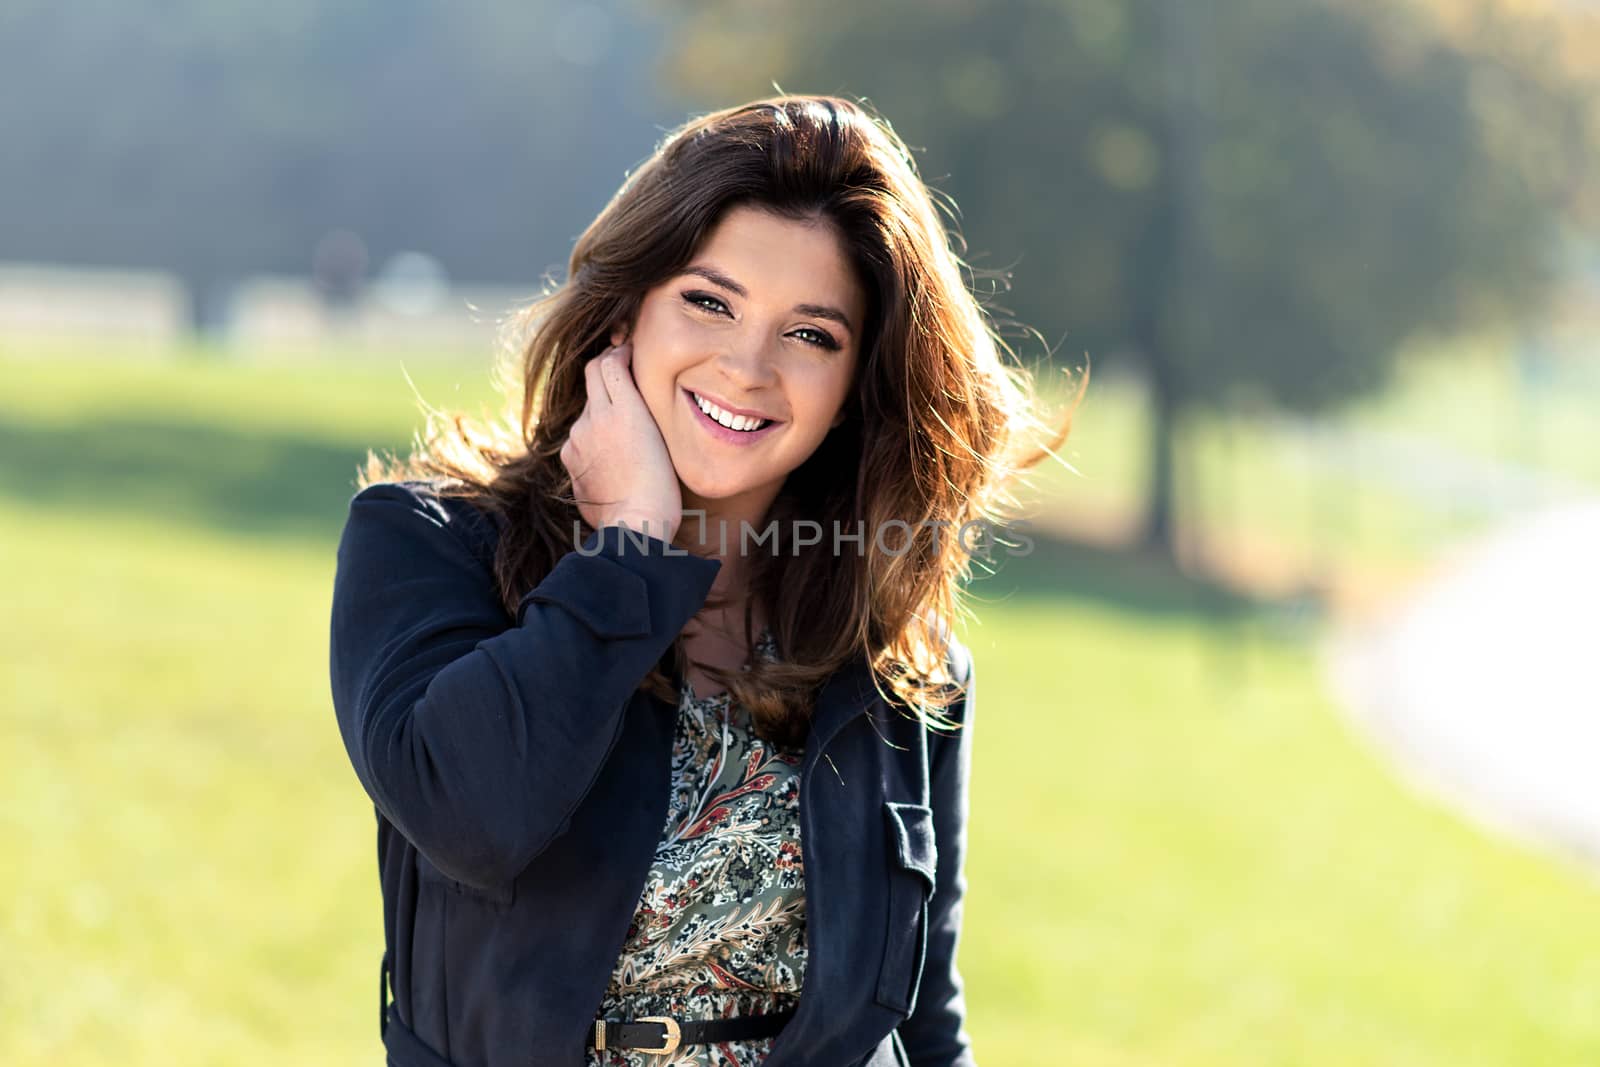 Portrait of a fashionable and lovely woman with nice hairstyle posing outdoor on a sunny day 